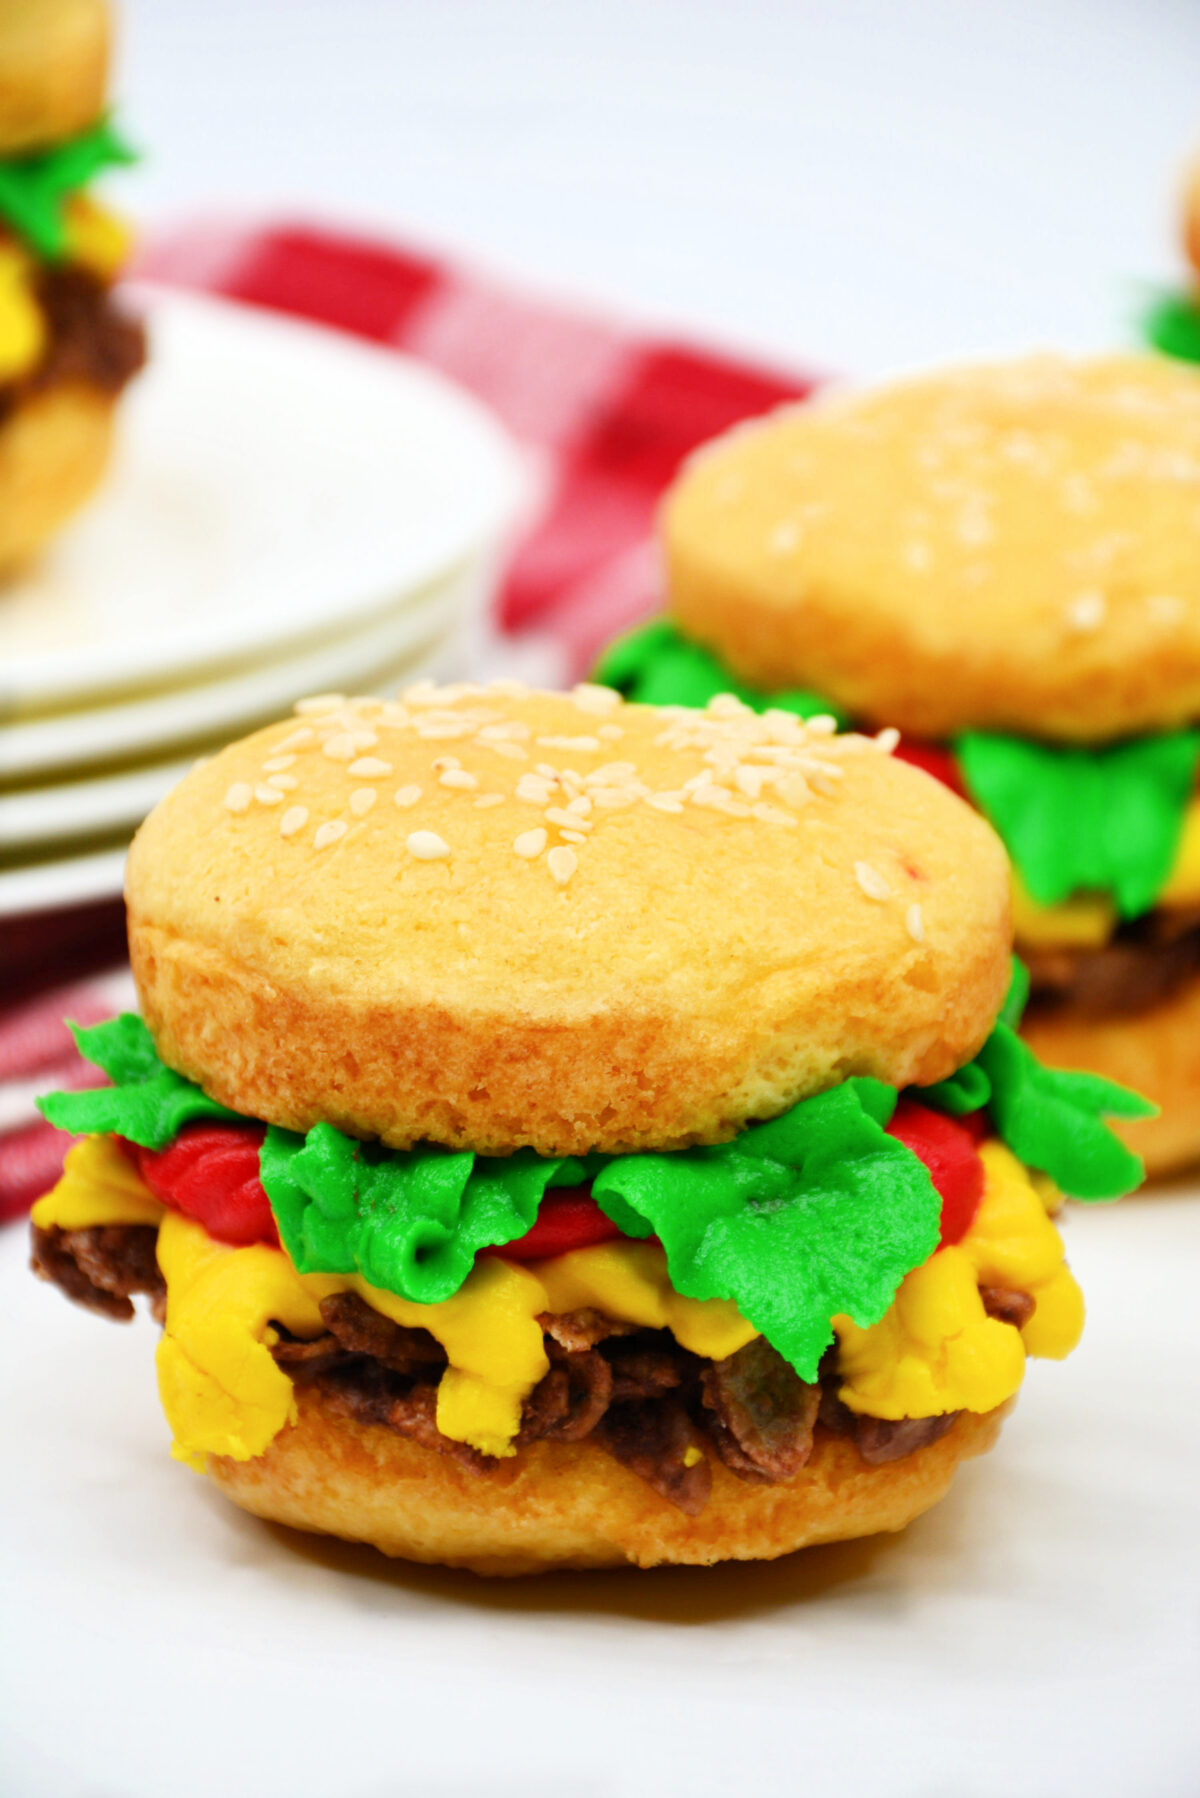 This recipe for cheeseburger whoopie pies is a fun, tasty dessert that both kids and adults will love. These treats are simple to make!